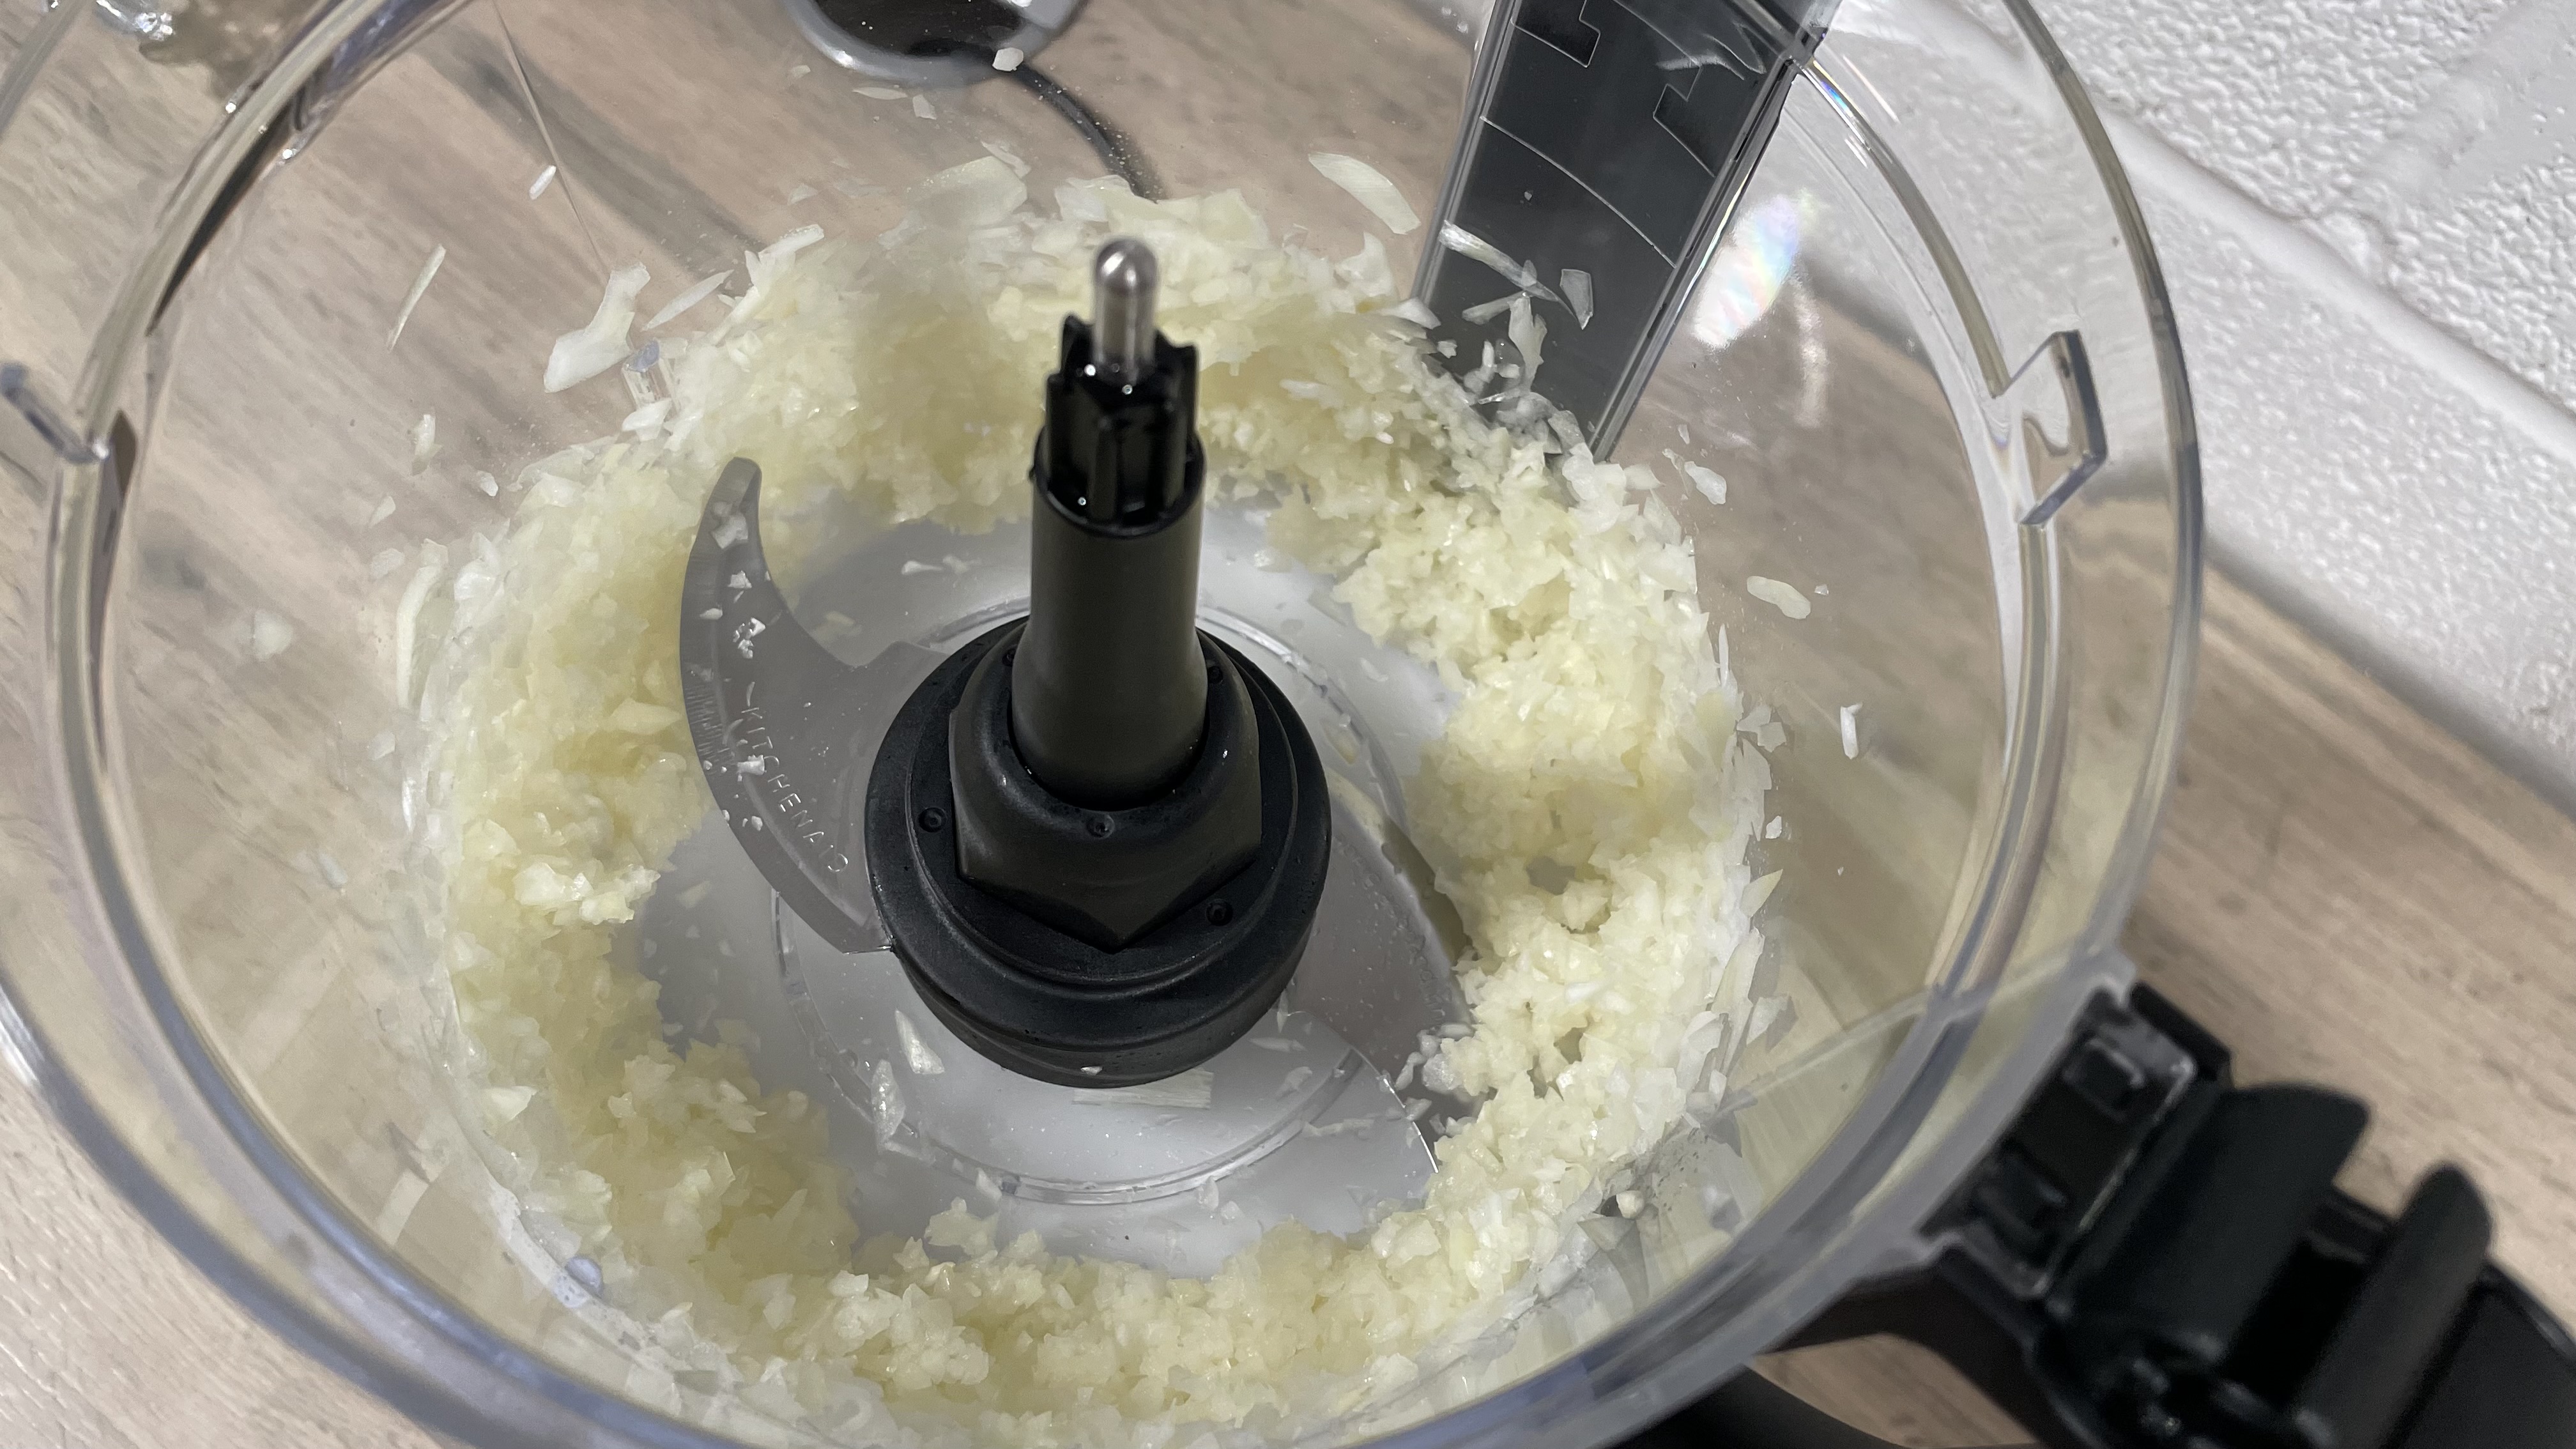 A close up photo of some onion that was chopped by the Kitchen Aid 13 cup processor.